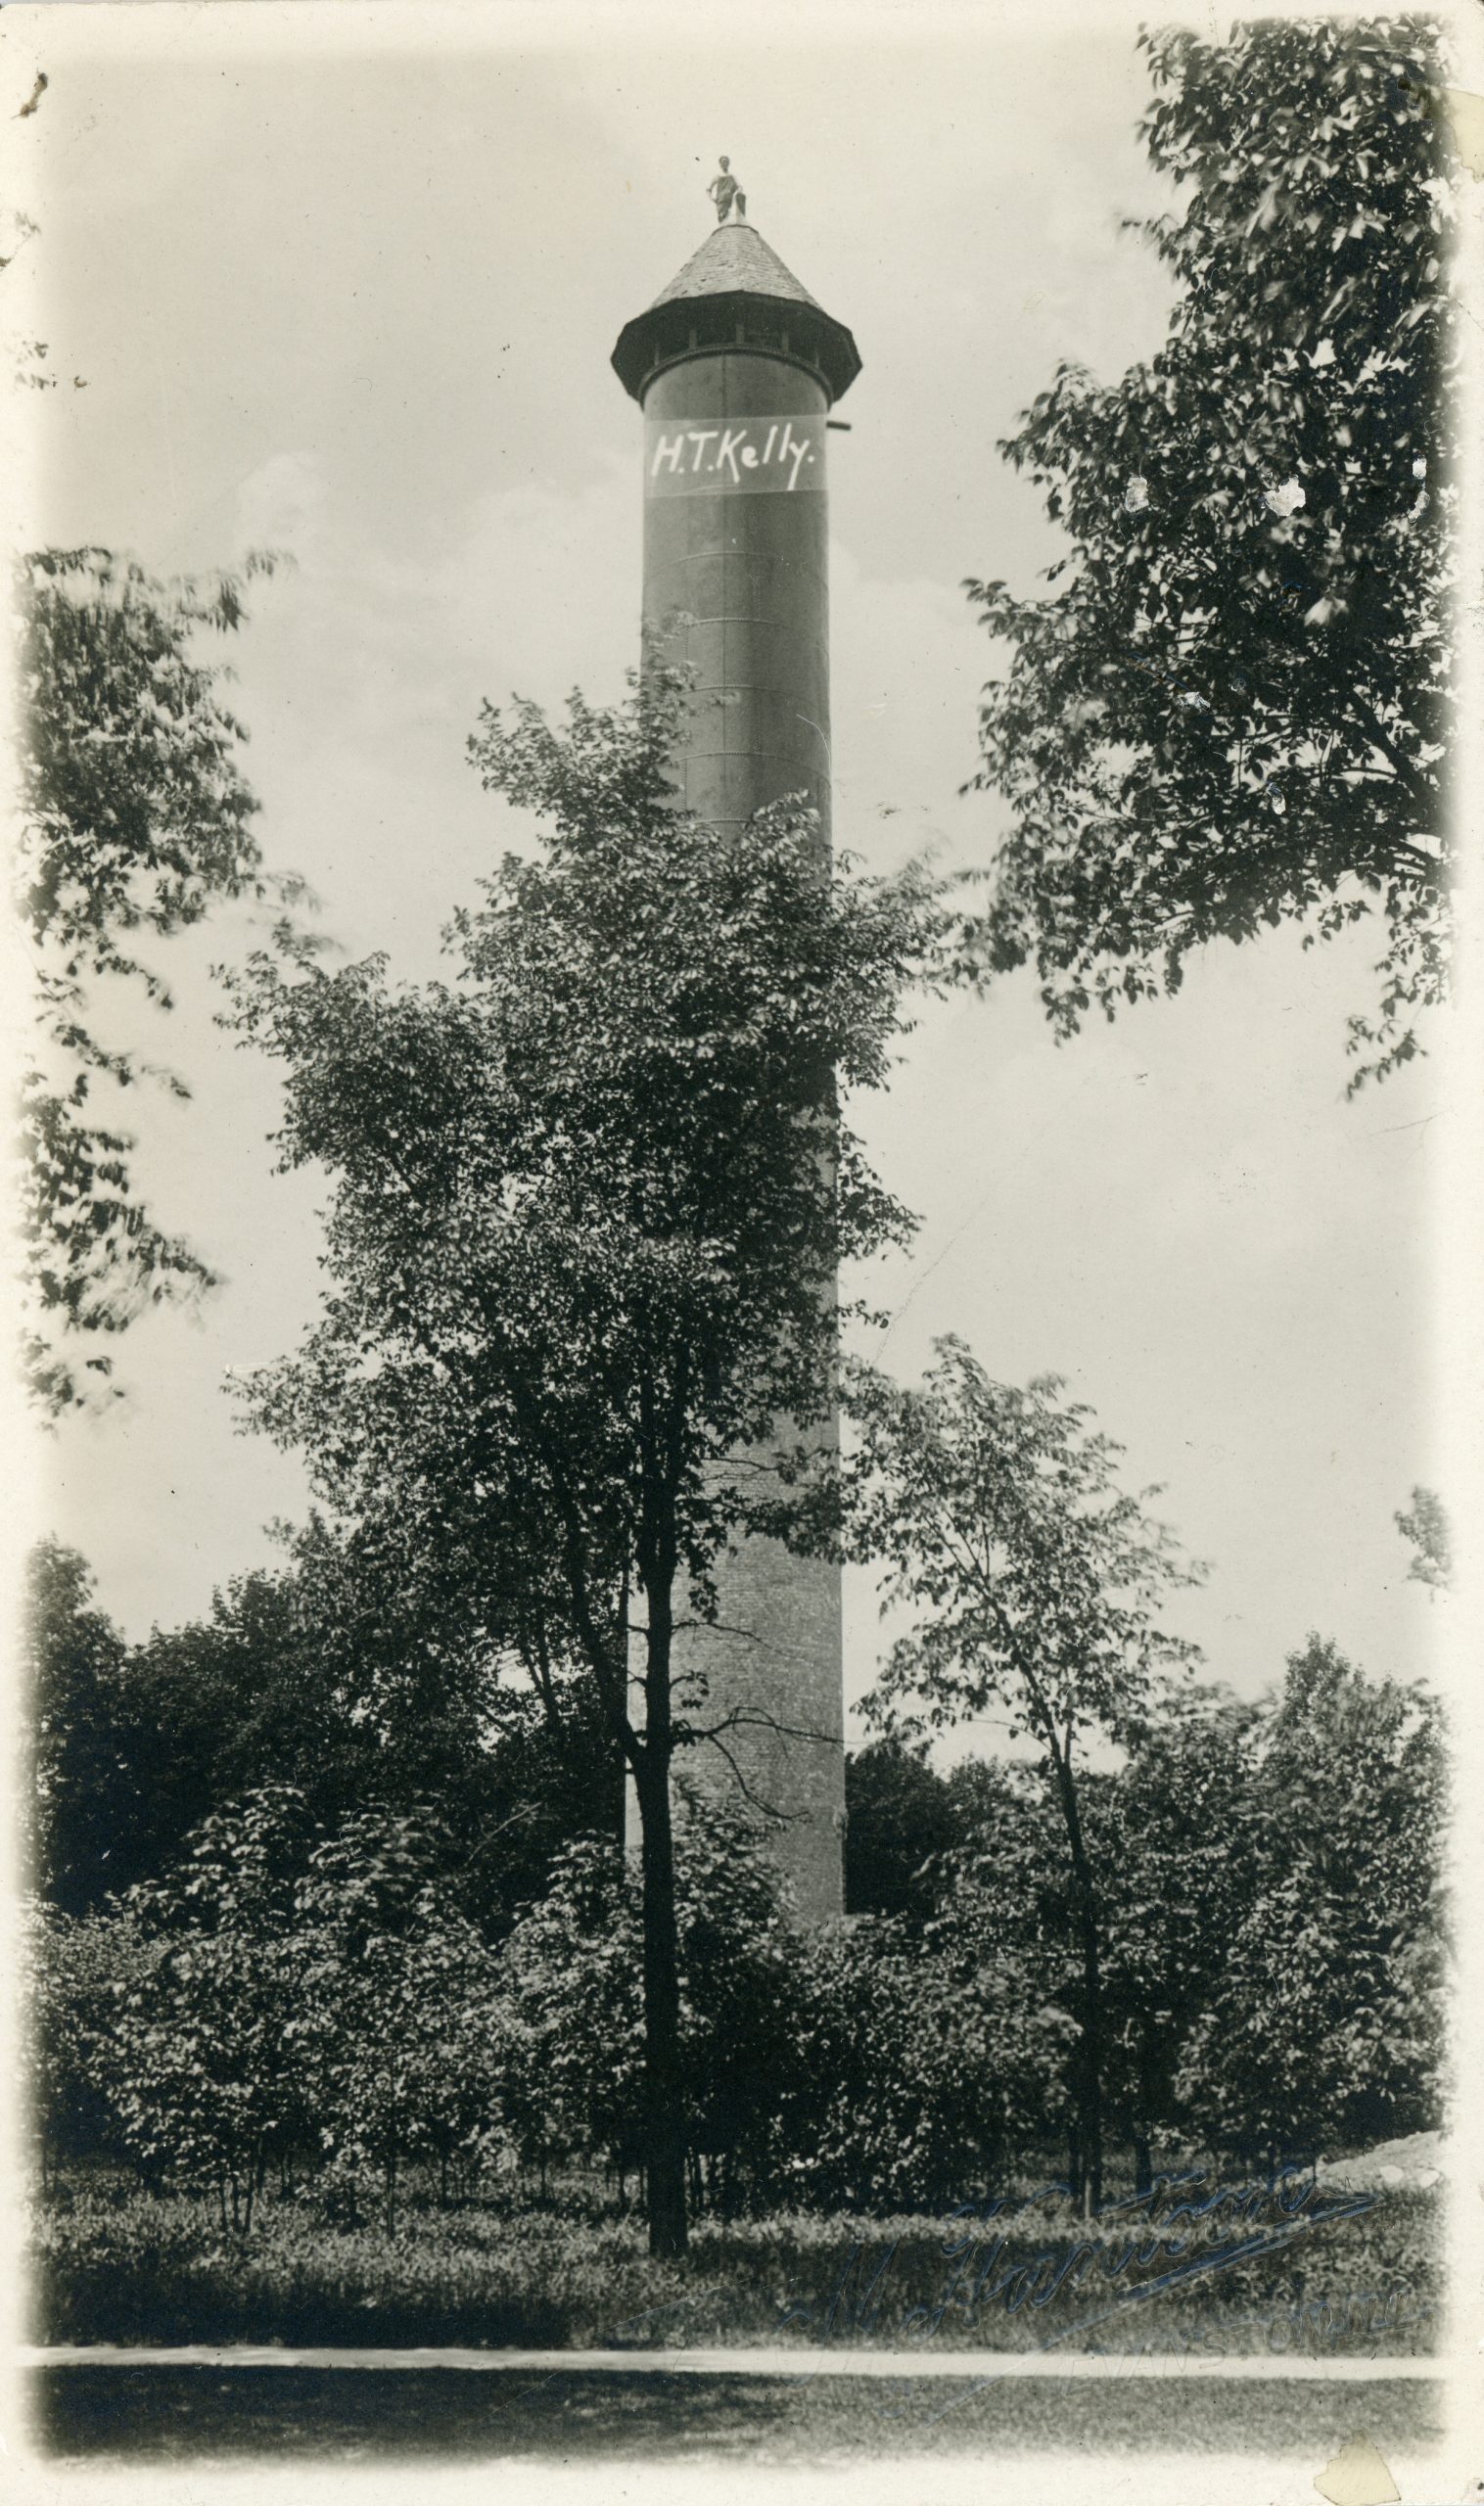 Kenilworth's first water tower was demolished in 1926.